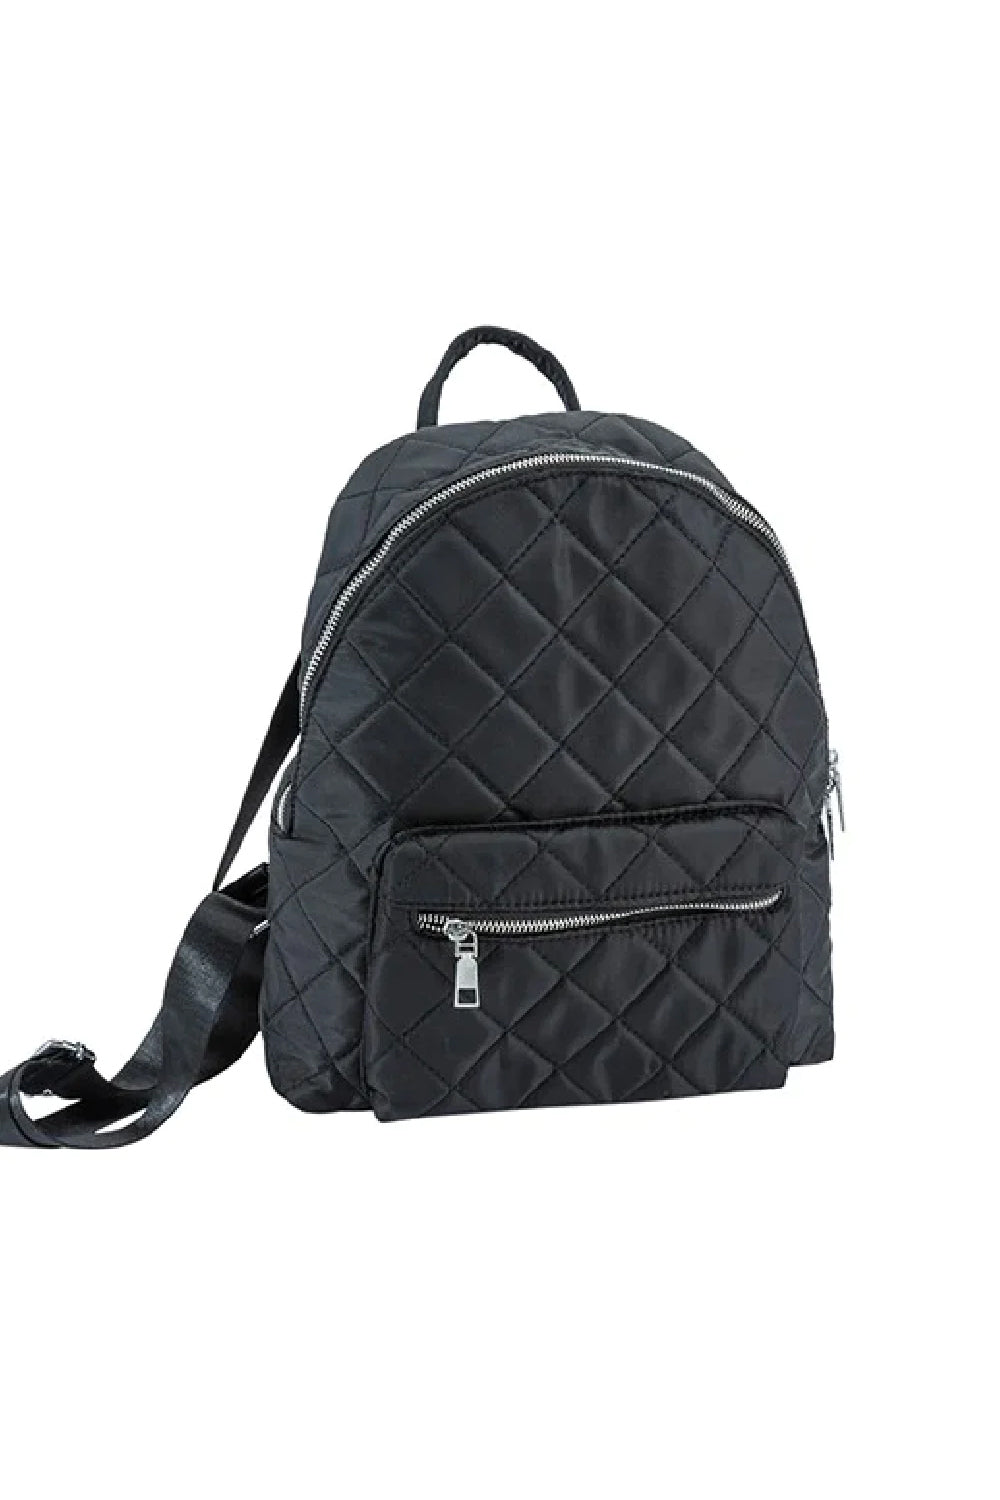 Nylon Quilted Fashion Backpack